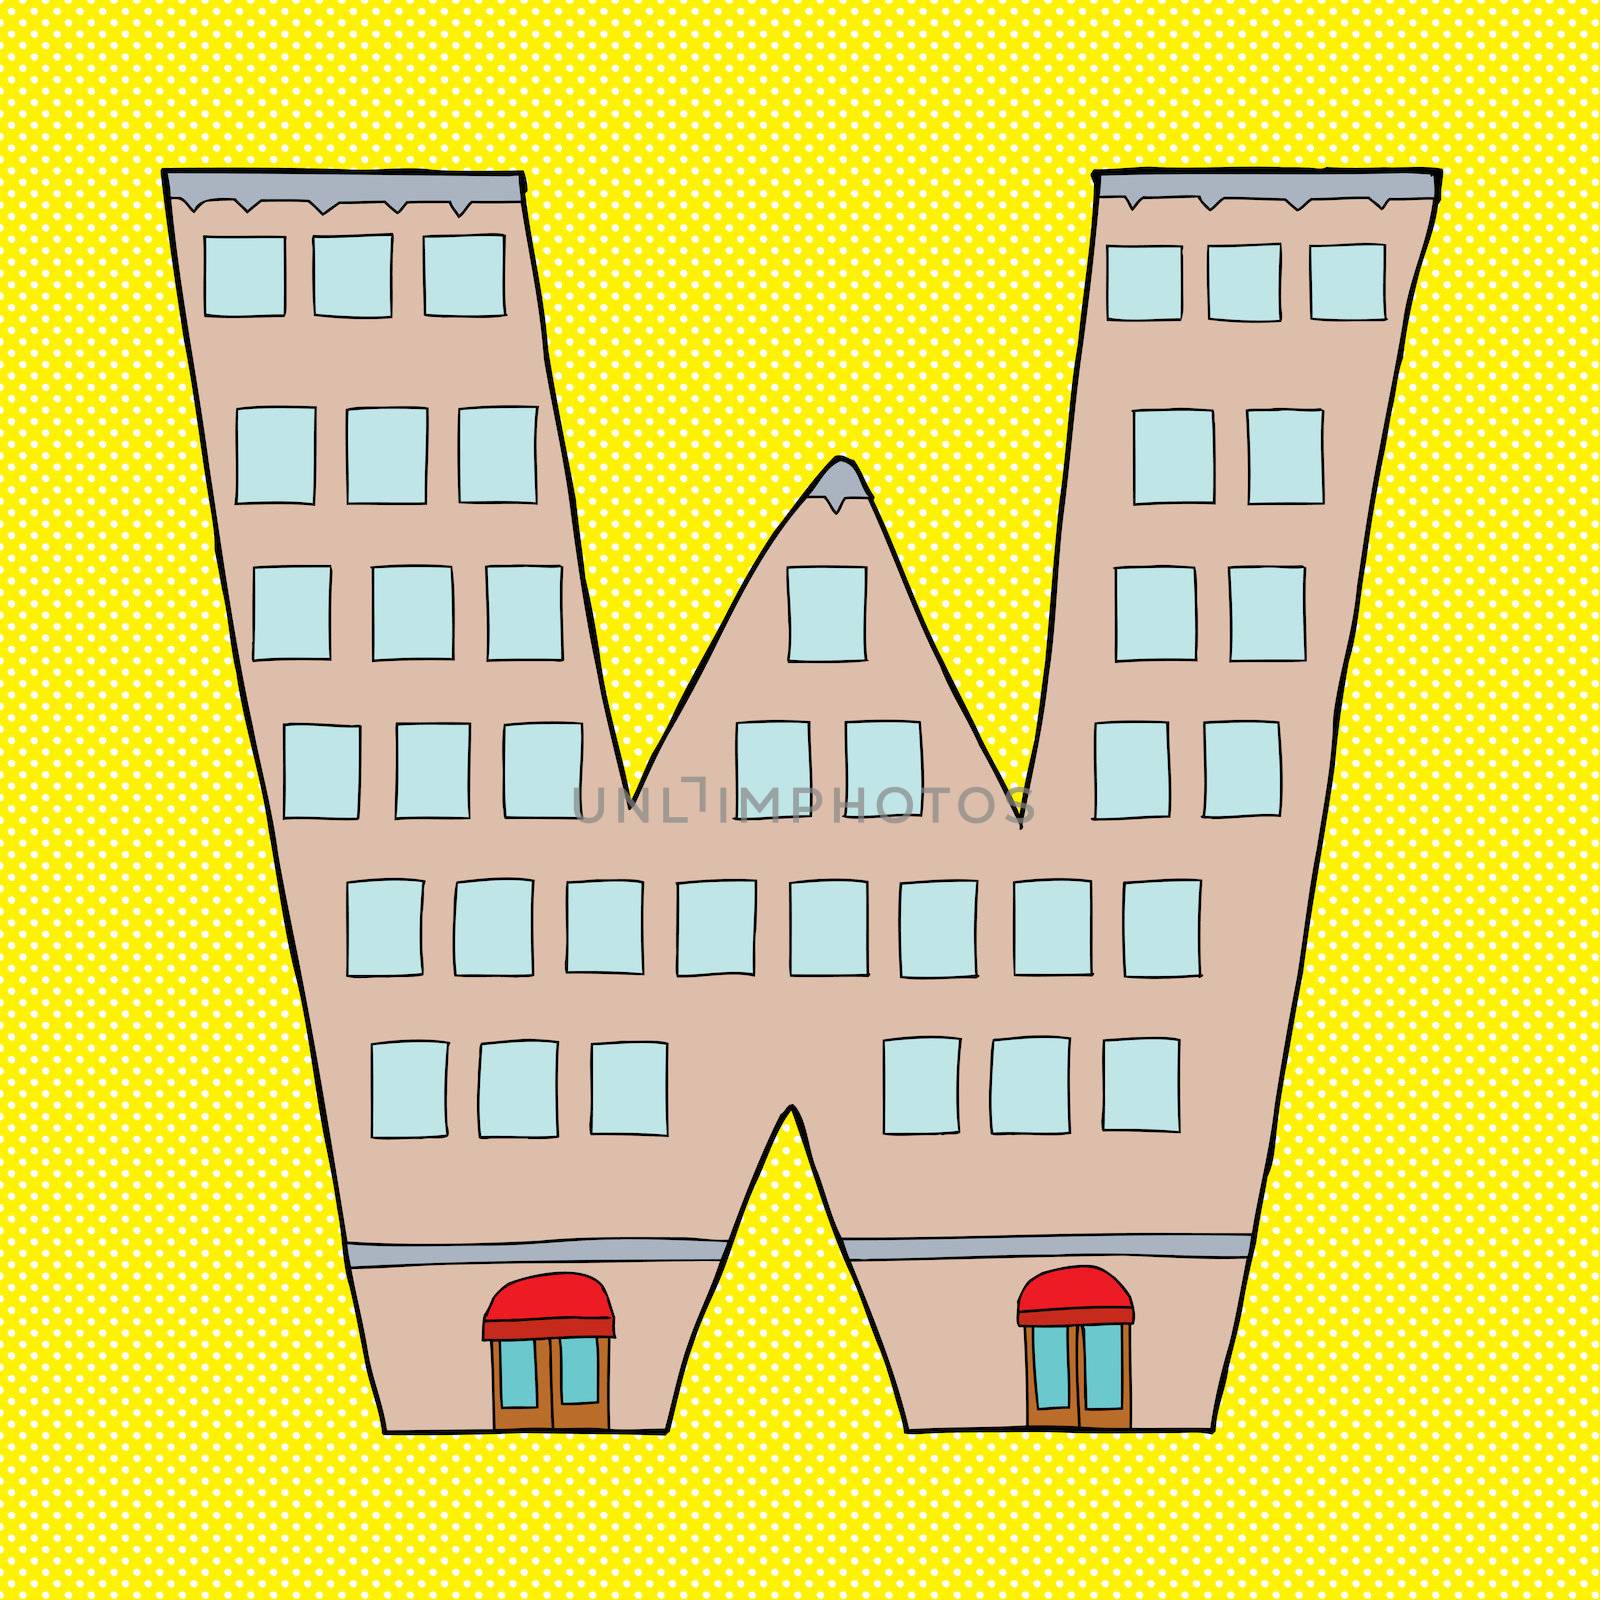 W letter in shape of tall hotel building